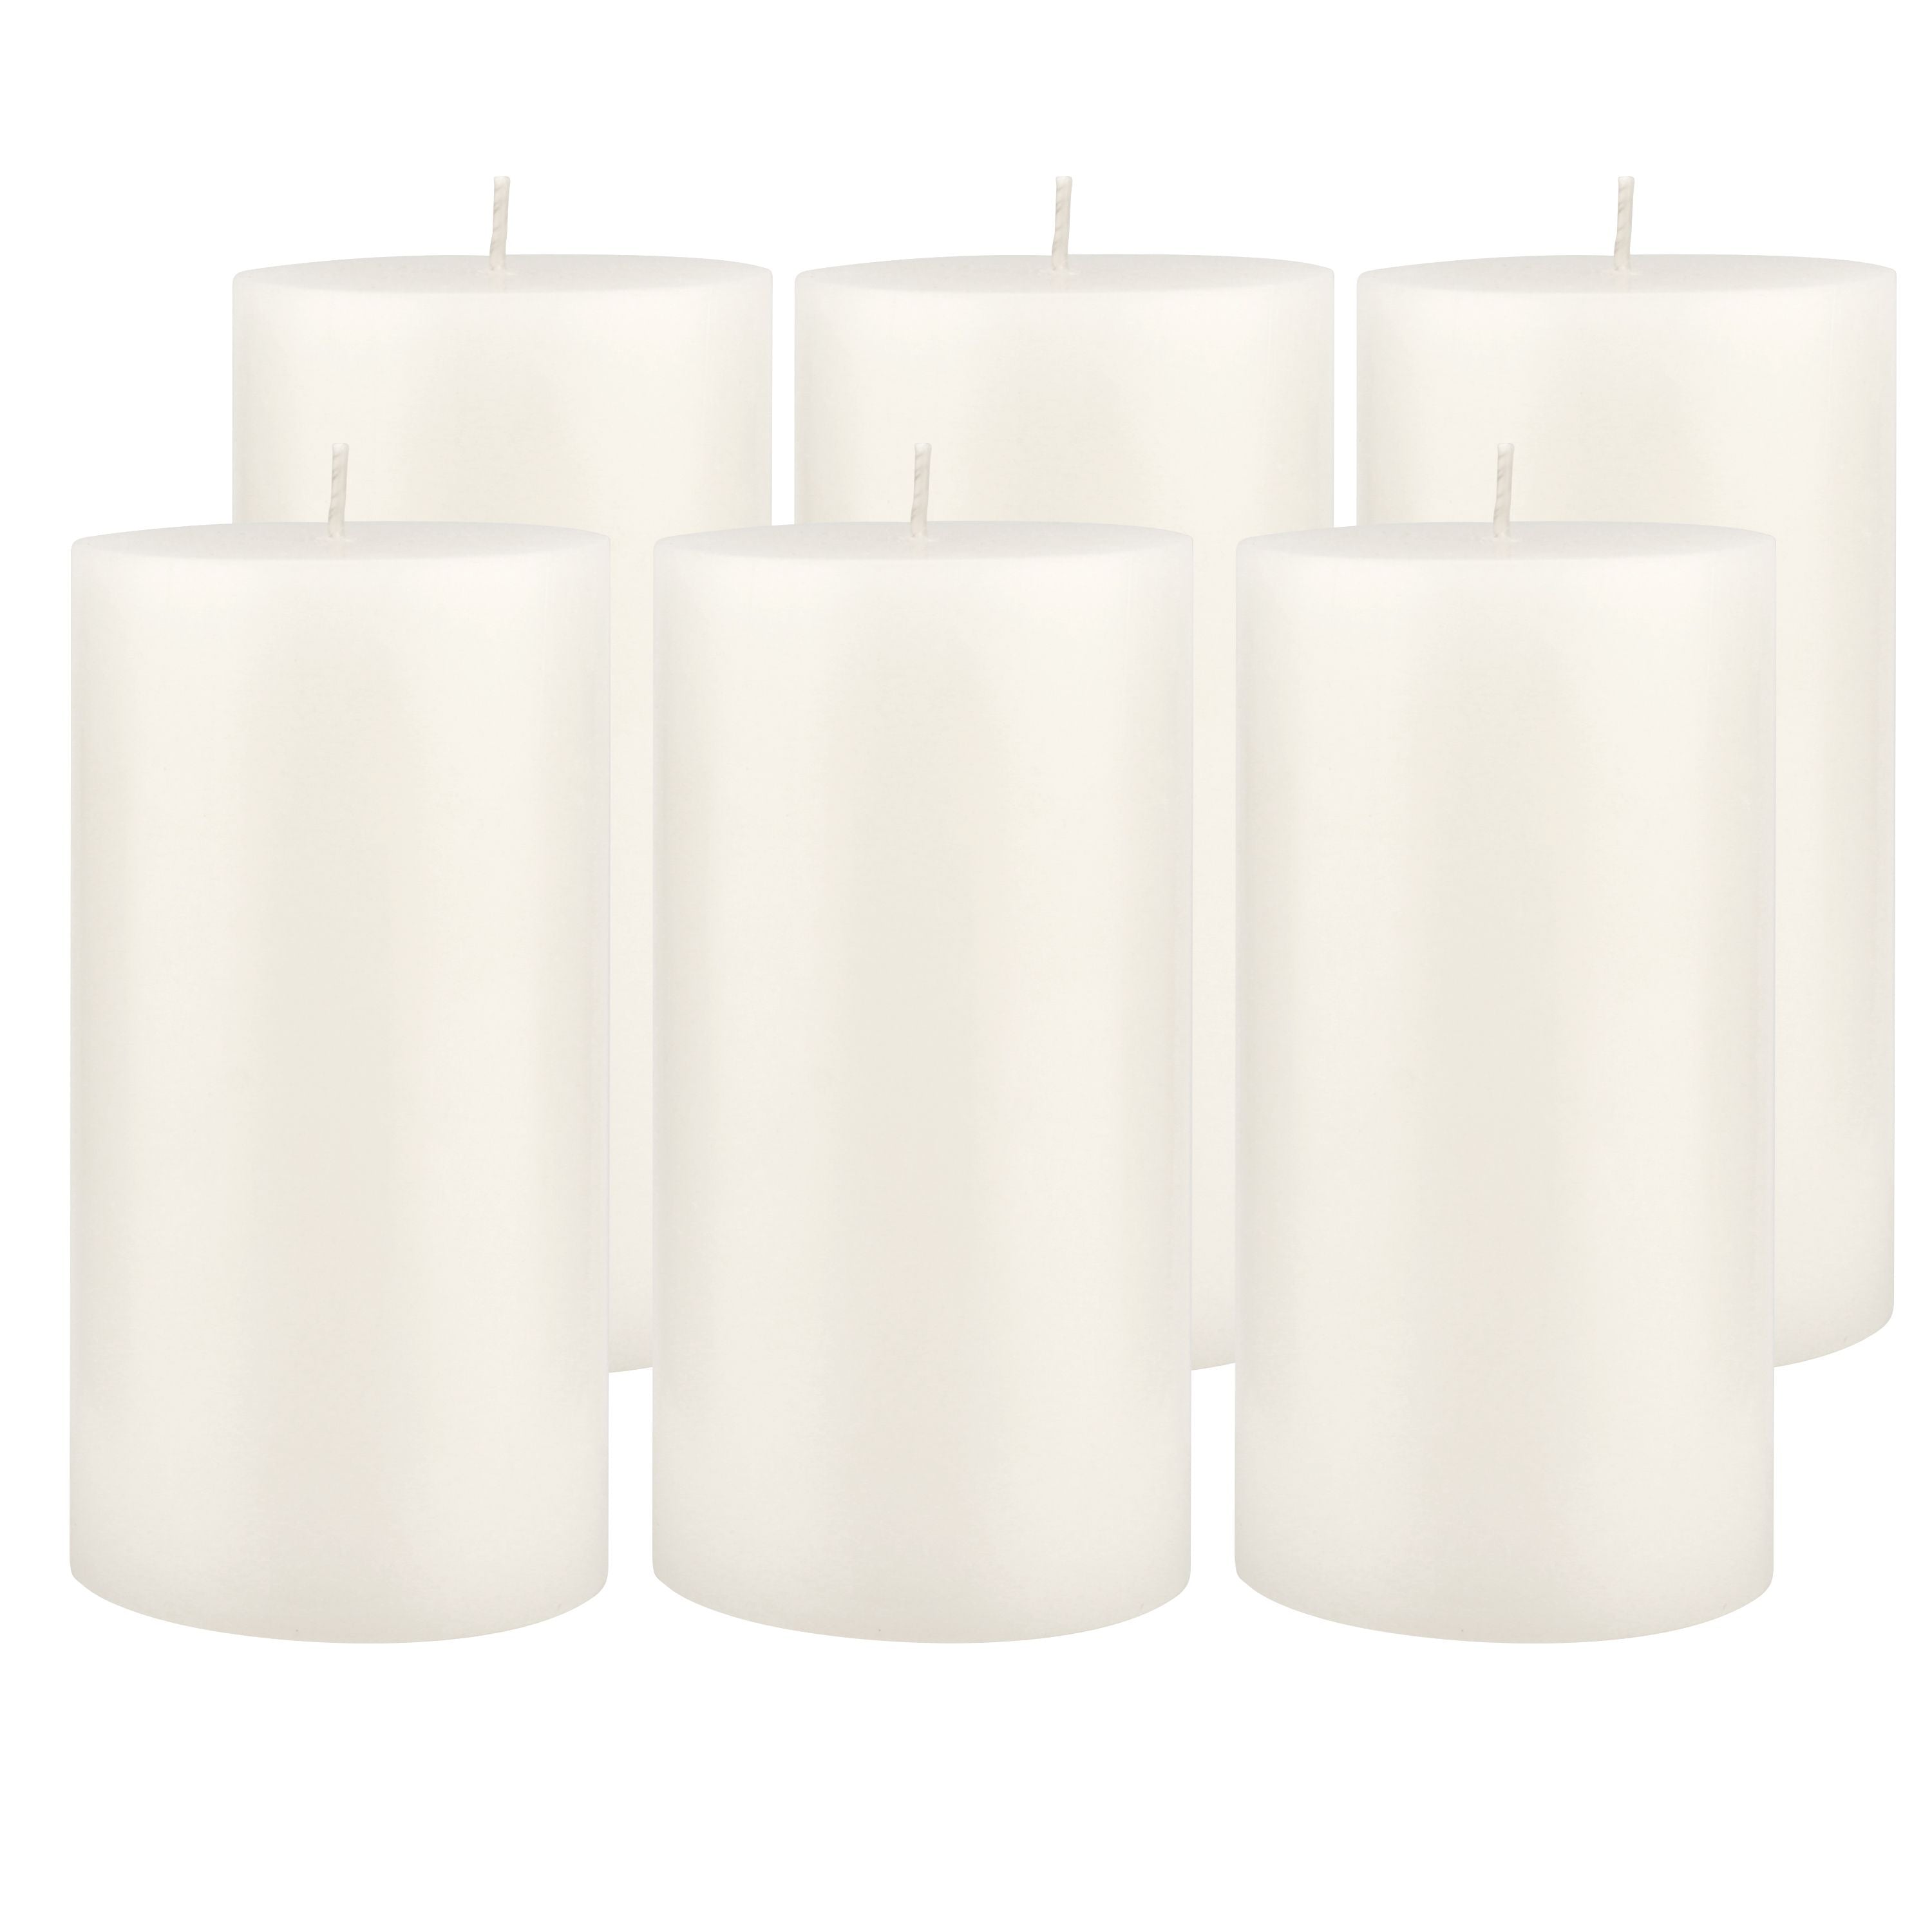 Stonebriar Unscented 3" x 6" 1-Wick White Pillar Candles, 6 Pack (WS)